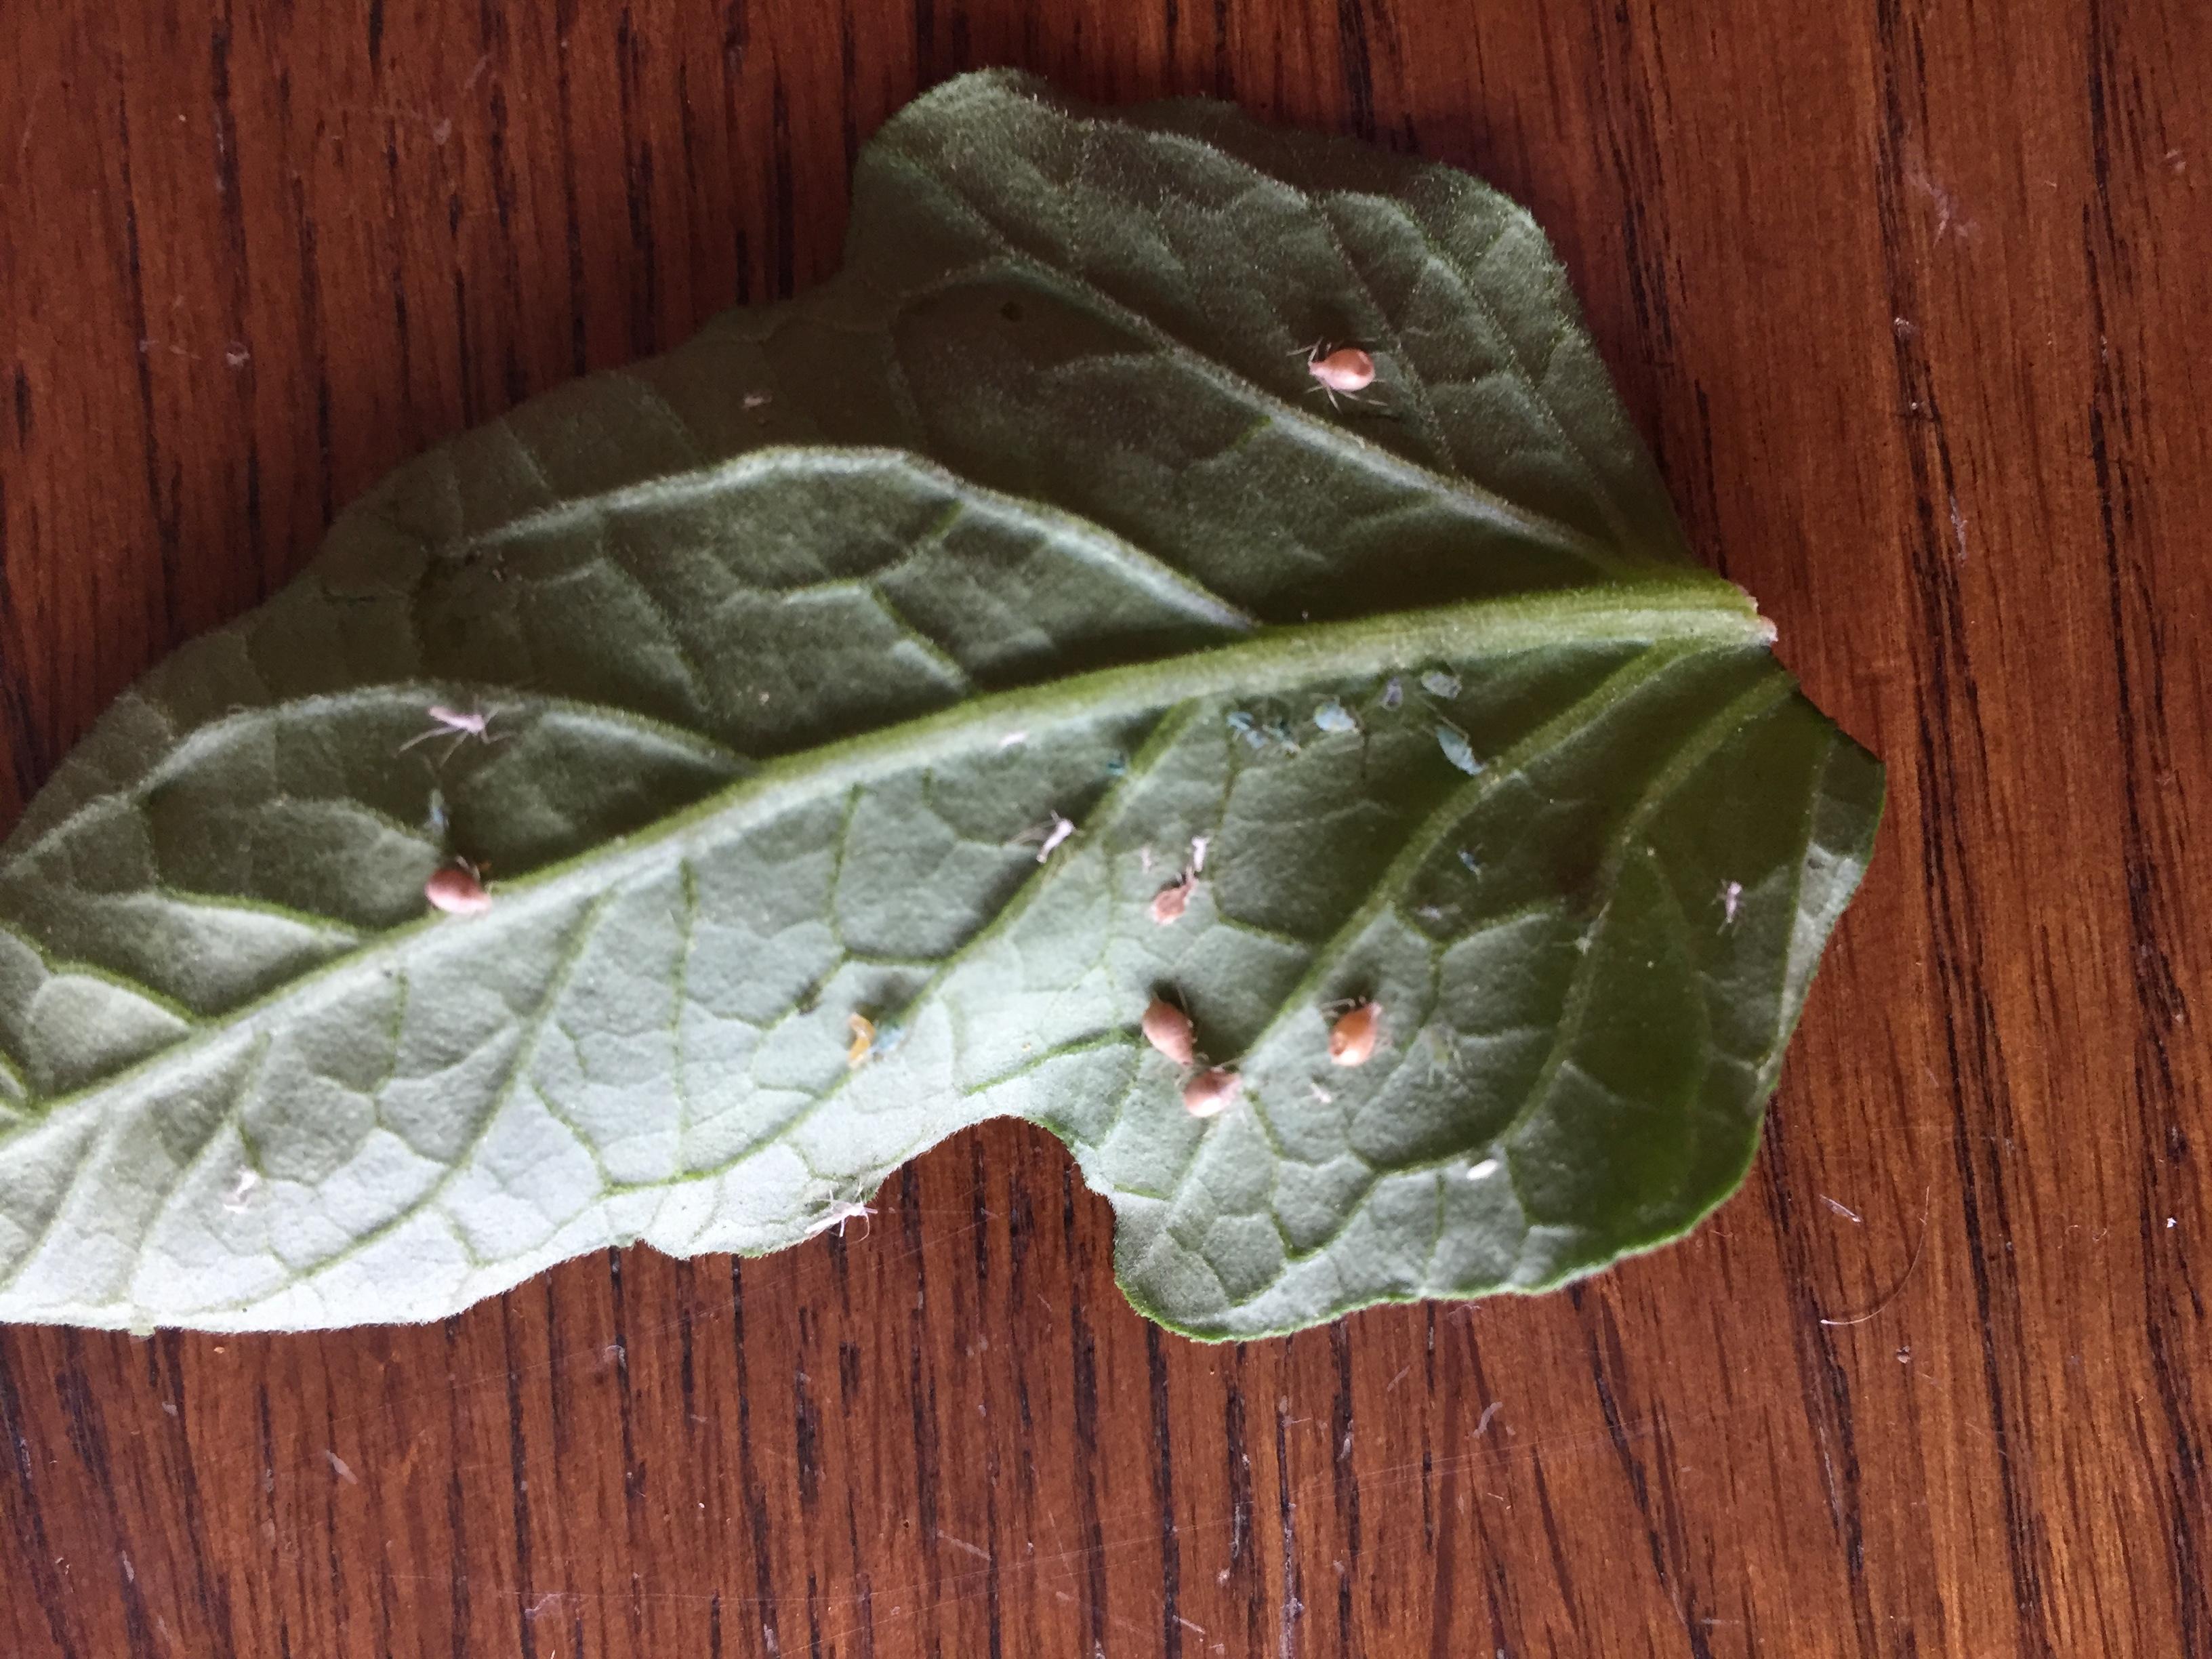 Healthy aphids (green), cast skins (white), and aphid mummies (brown) that were parasitized by aphid wasps (adult wasps emerged from the holes)